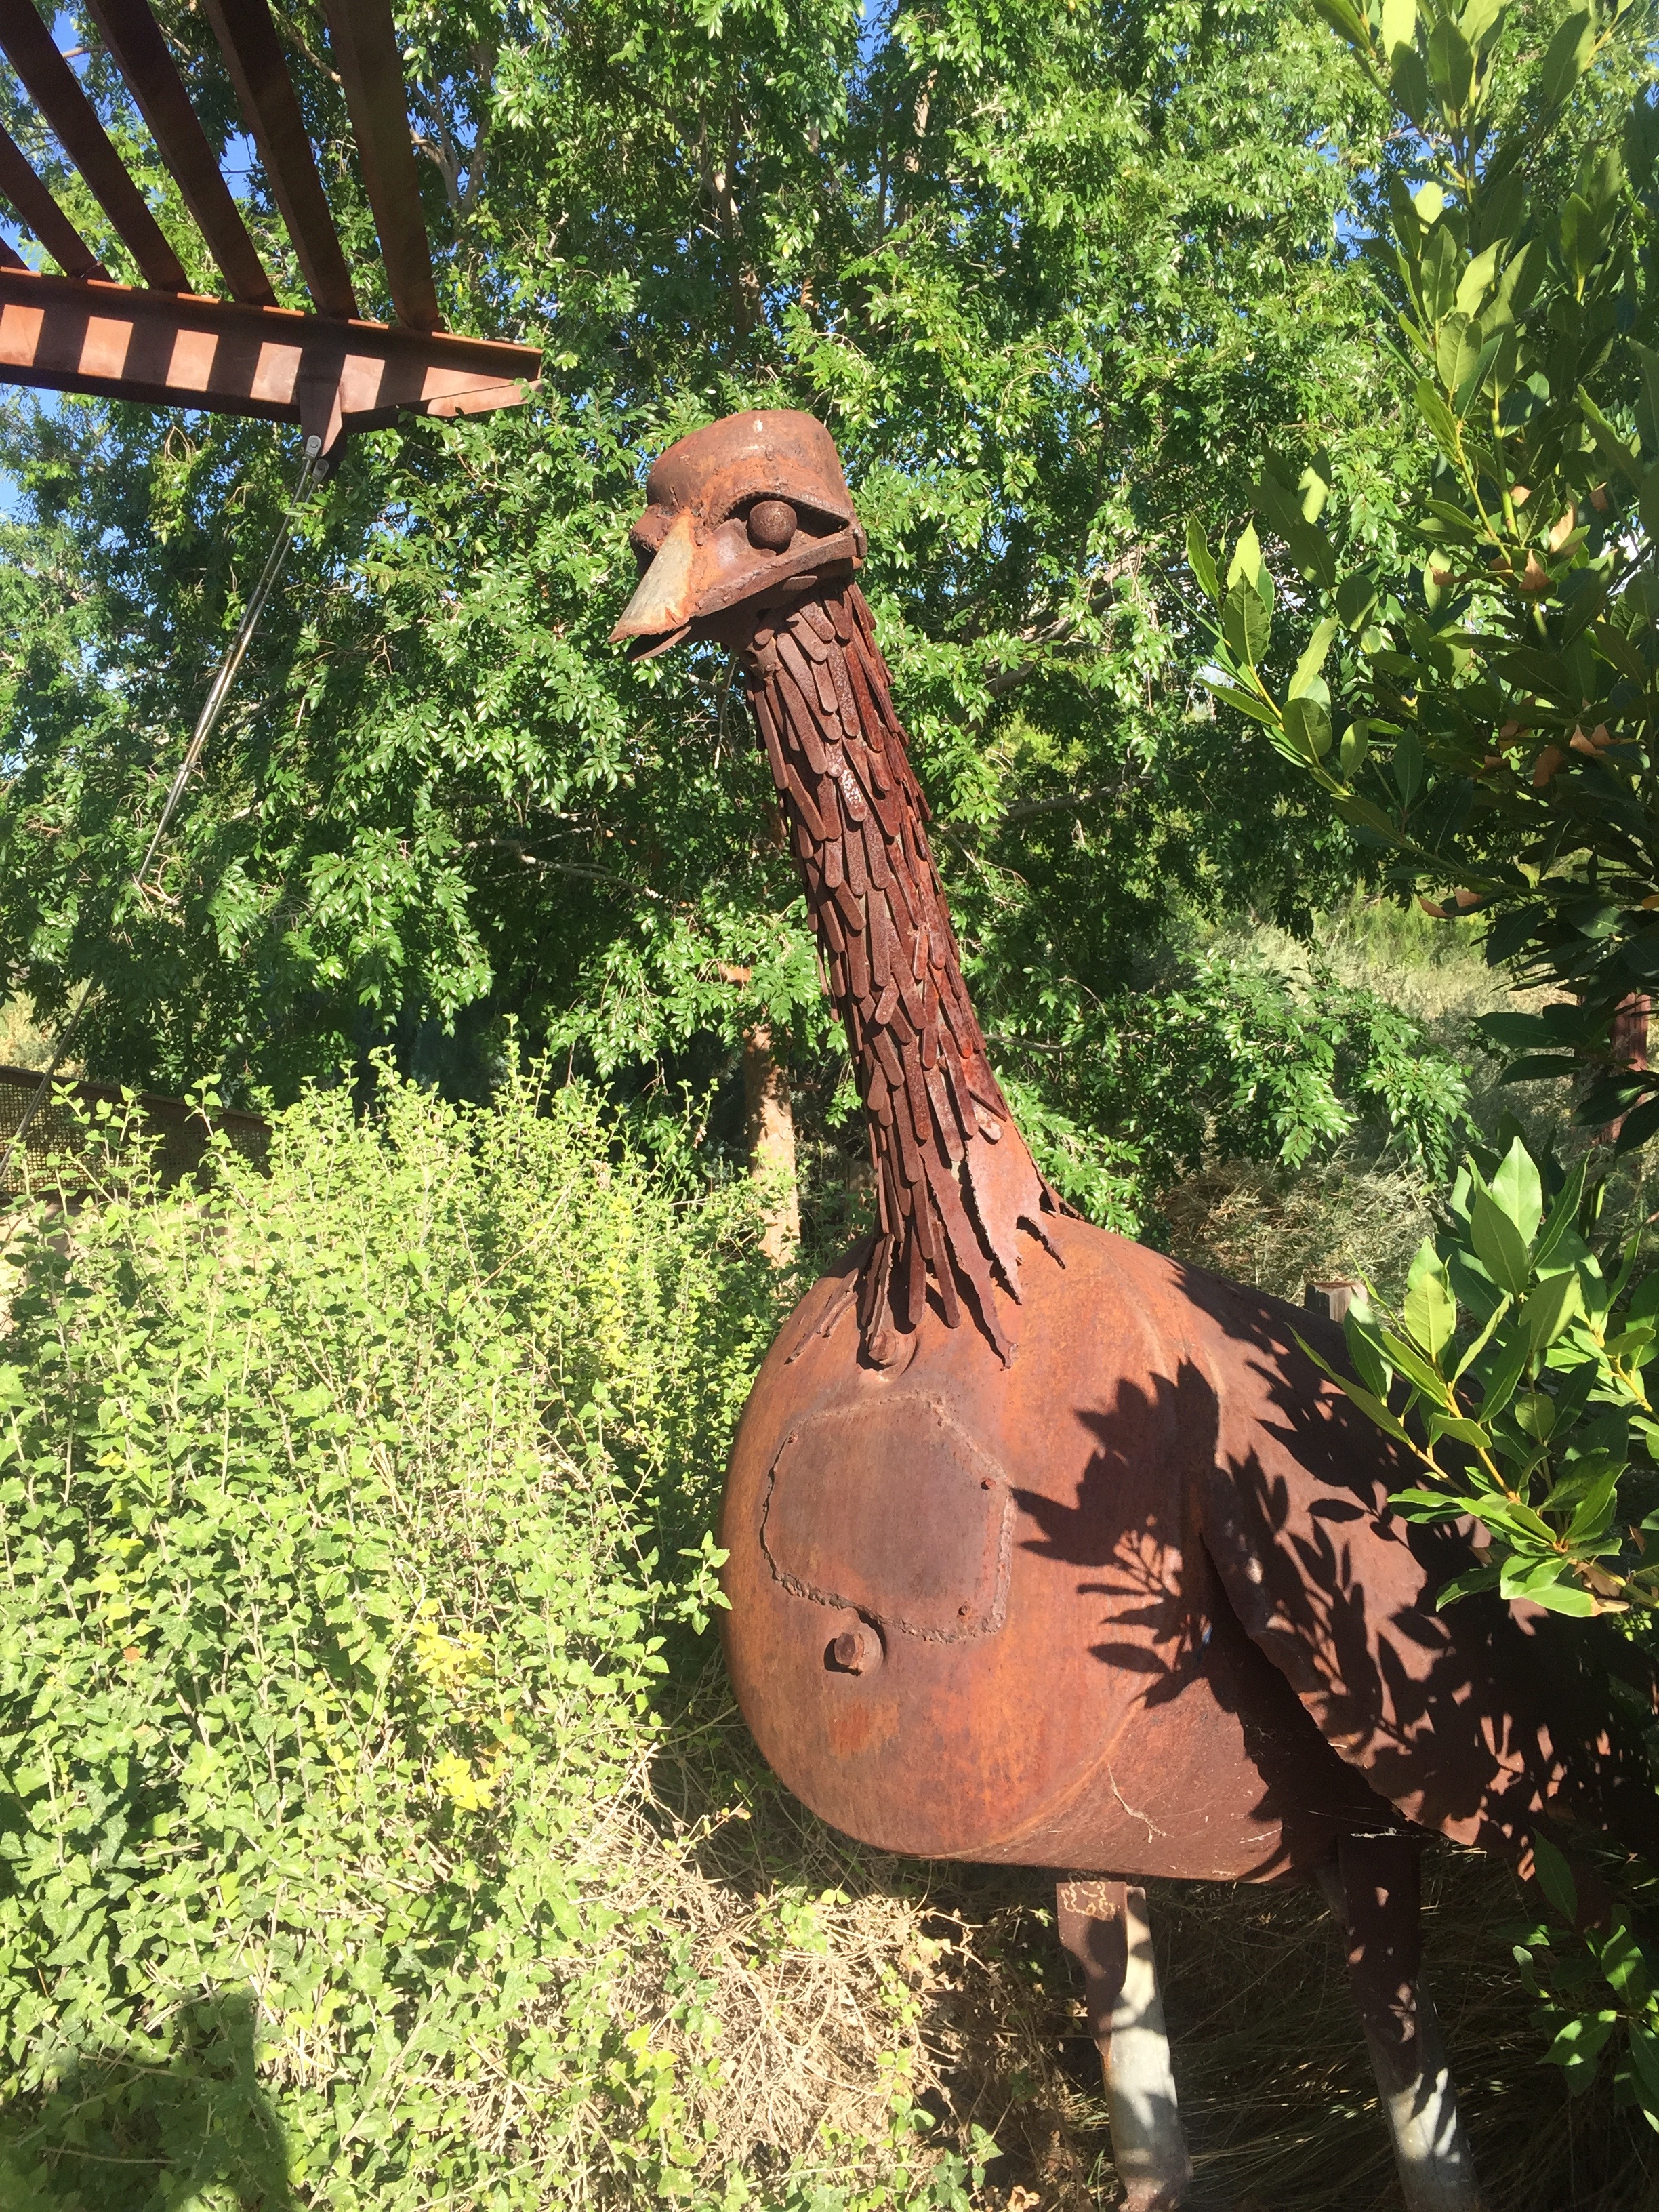 Sculpture of an emu made out of recycled metal at Springs Preserve